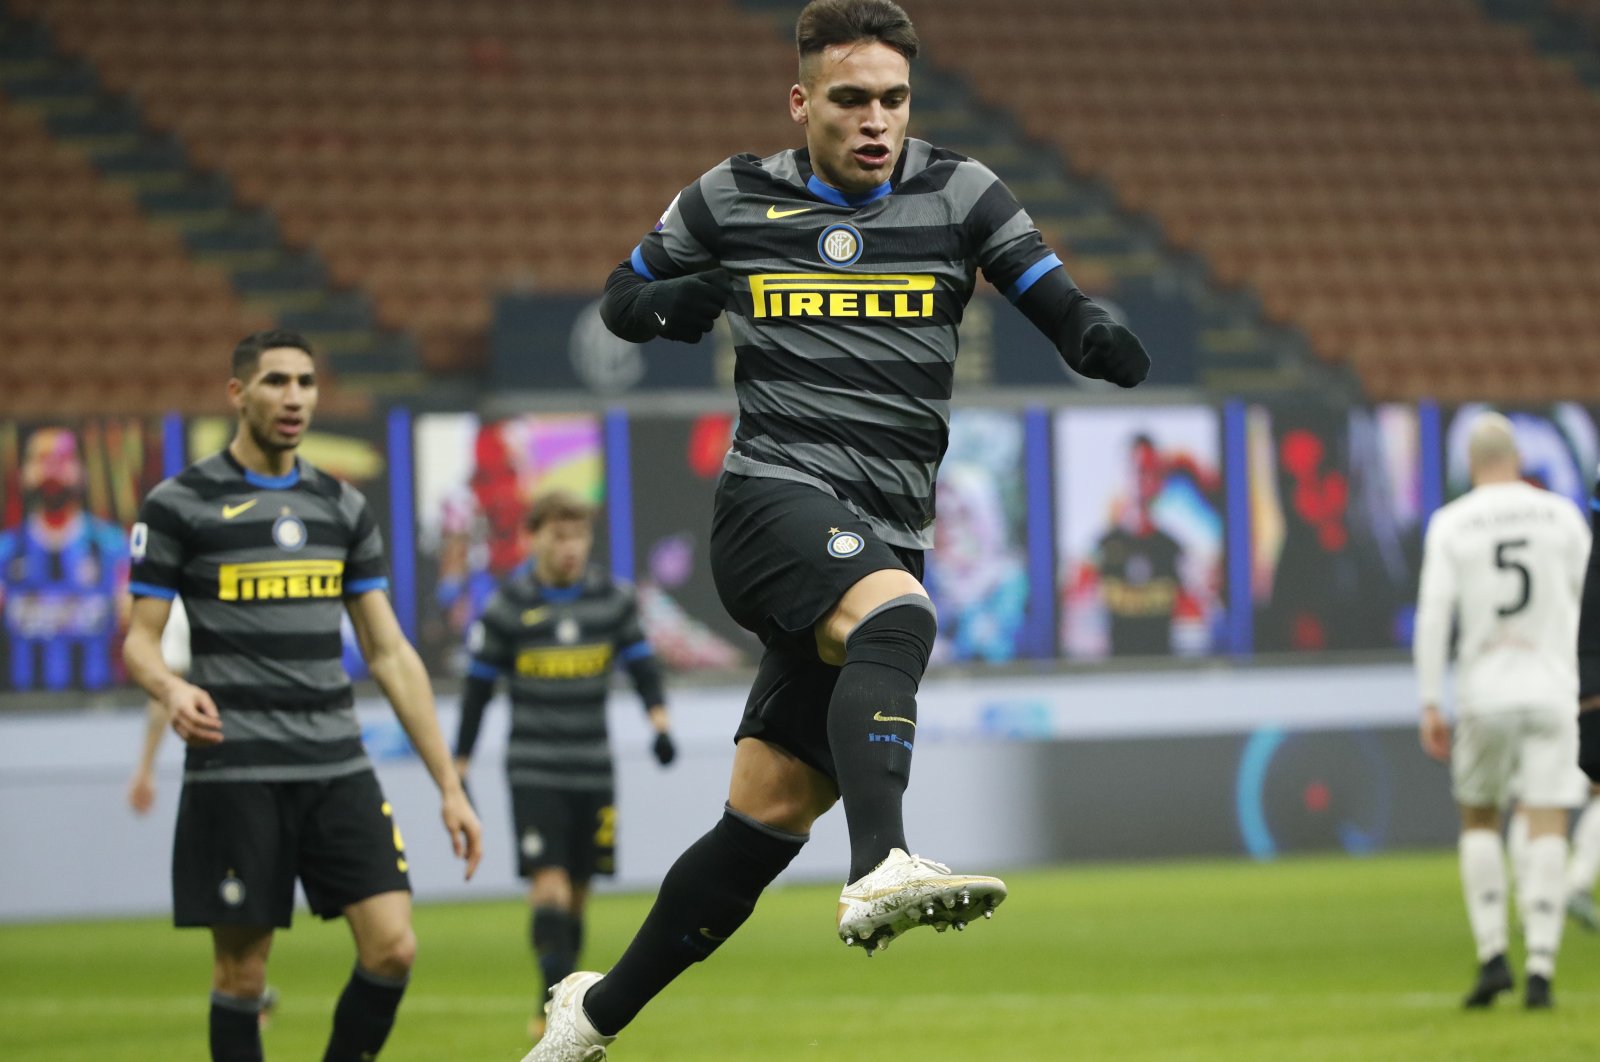 Inter Milan's Lautaro Martinez celebrates a goal during a Serie A match against Benevento at the Giuseppe Meazza stadium, in Milan, Italy, Jan. 30, 2021. (Reuters Photo)